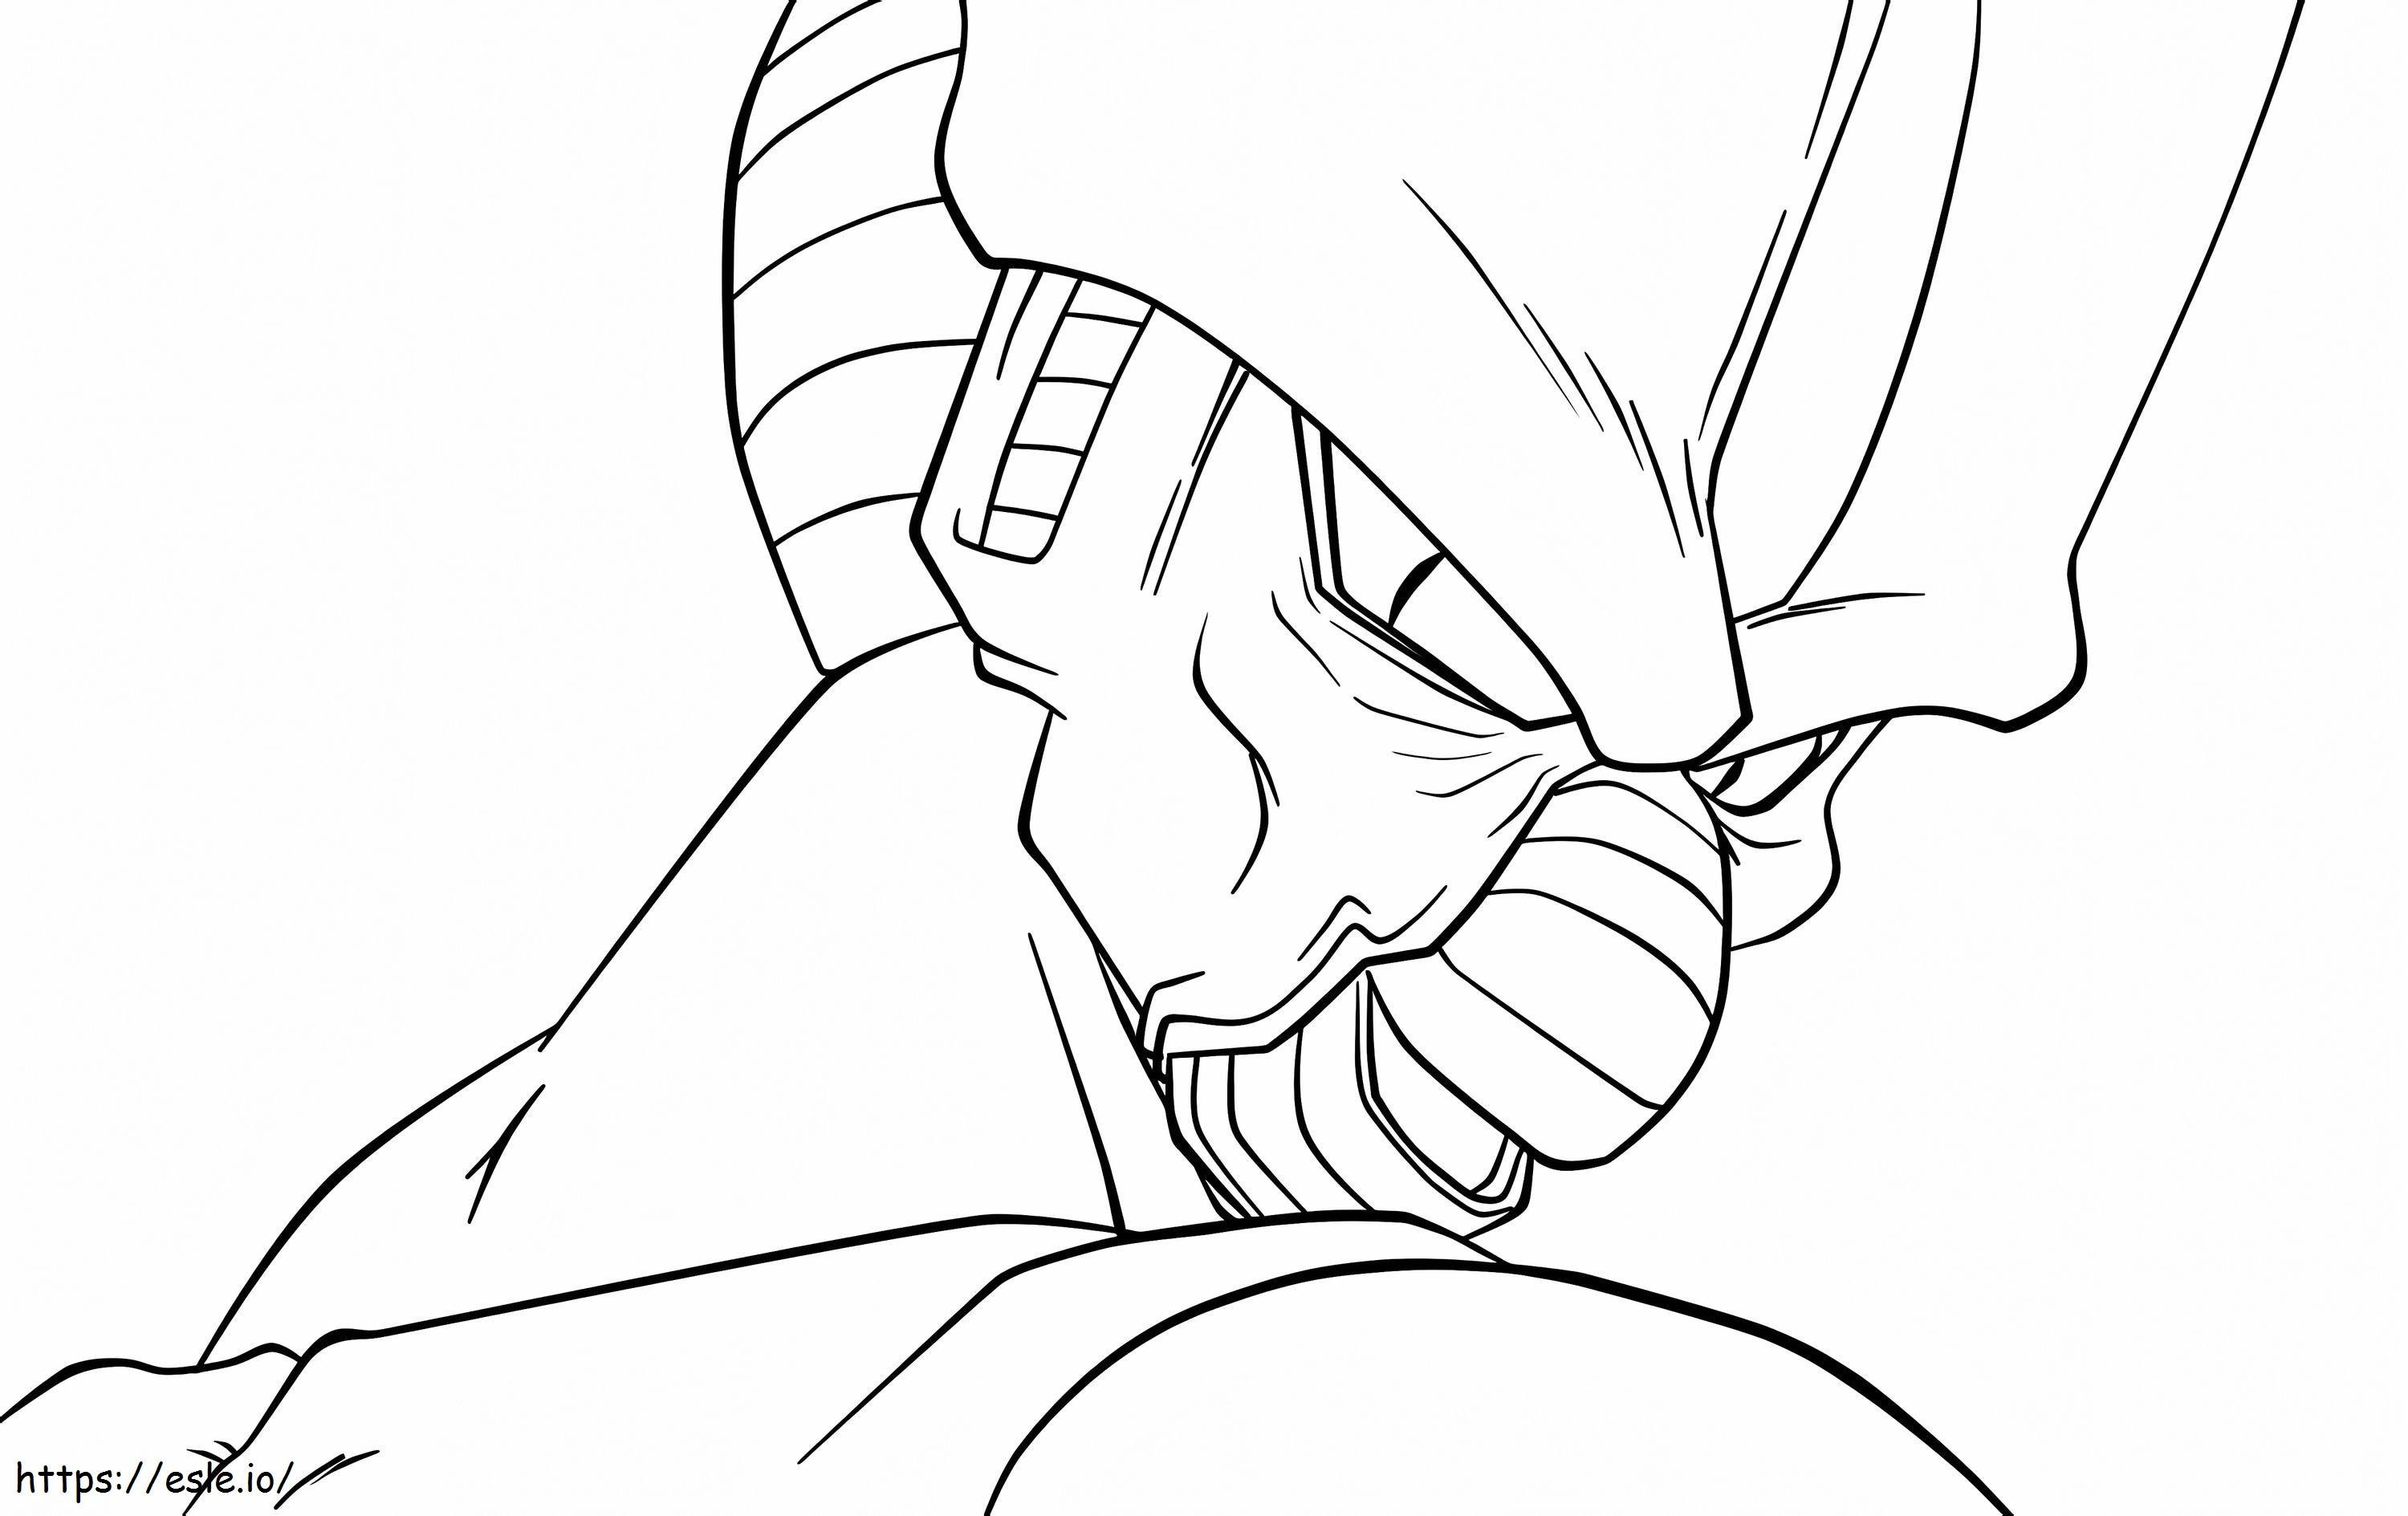 Imperfect Cell De Dragon Ball Z coloring page